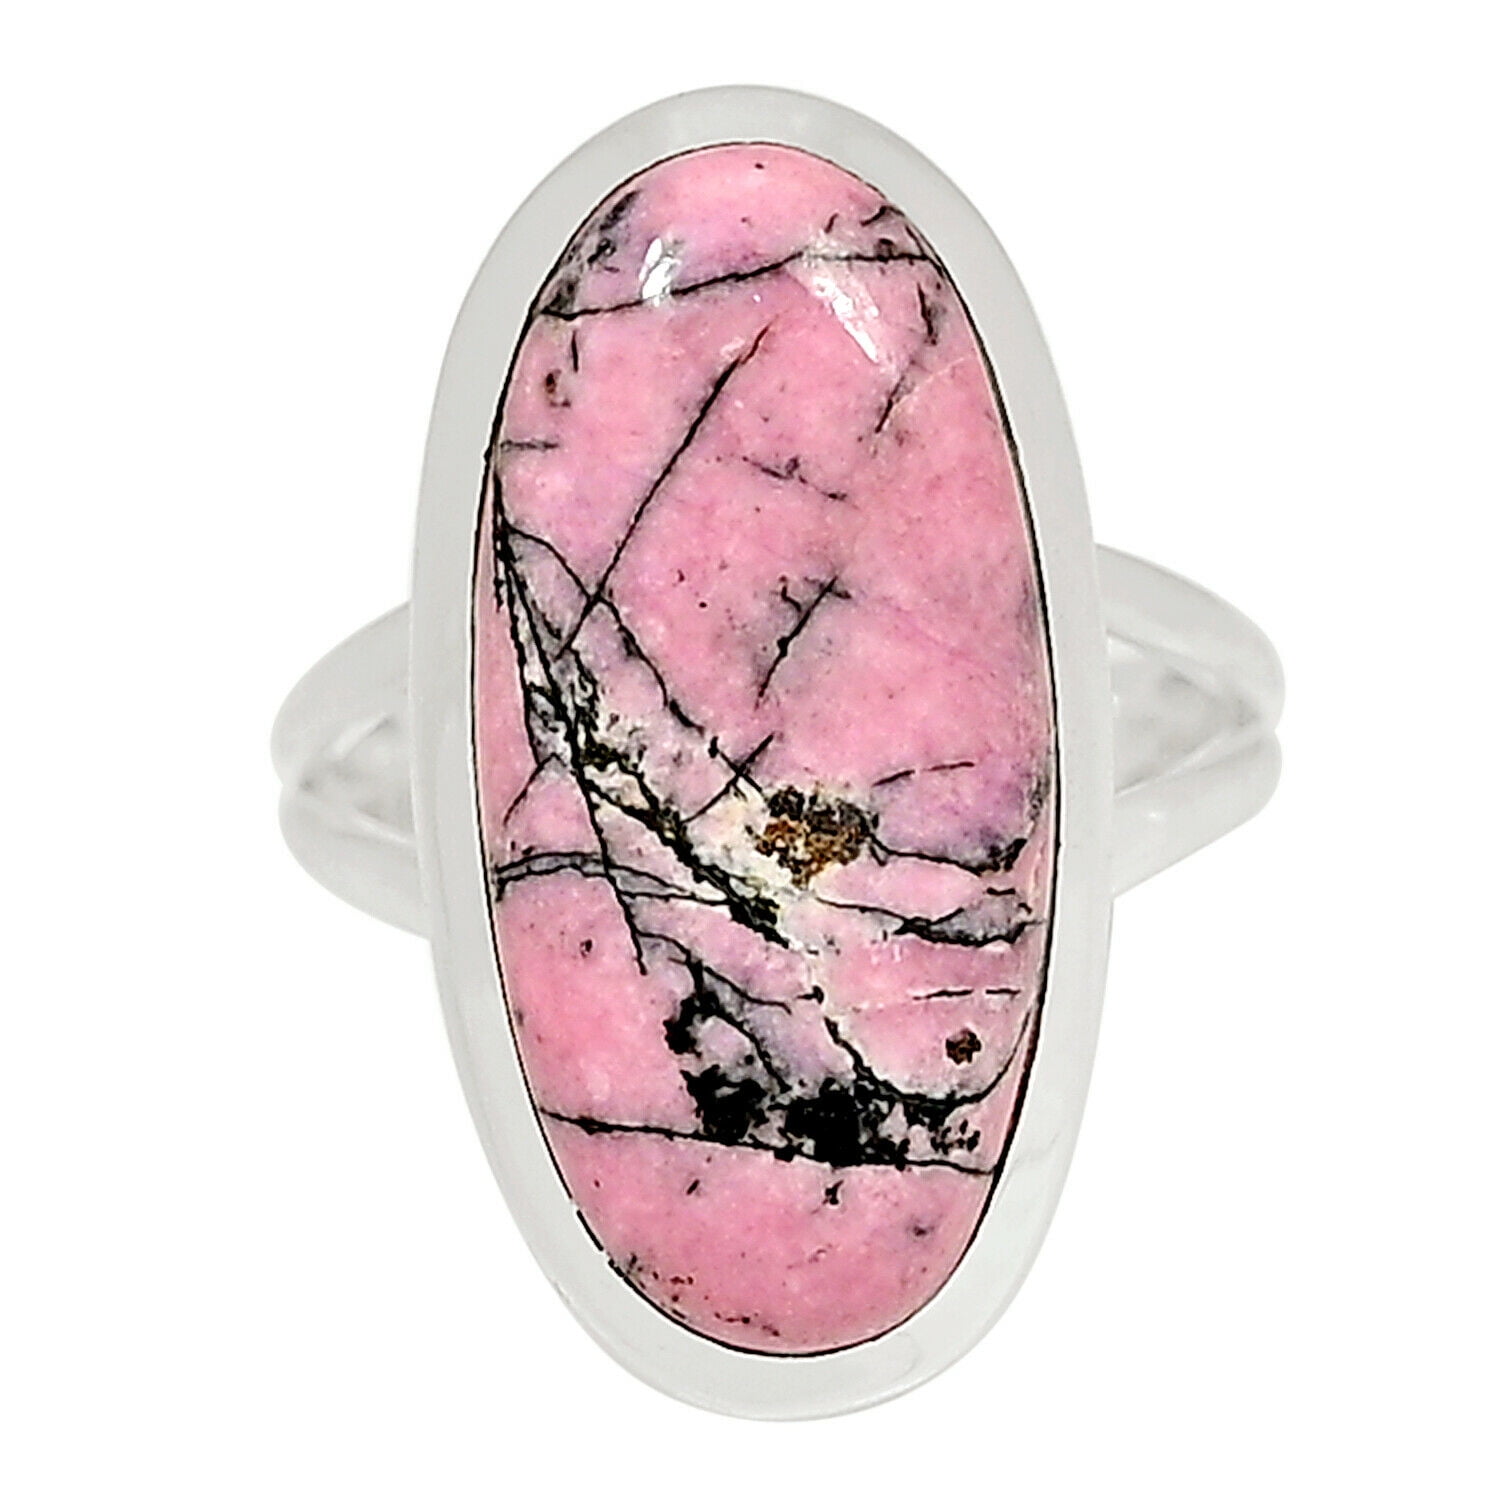 Turkish Jewelry Oval Pink Cat's Eye Topaz 925 Sterling Silver Ring Size 8.5 